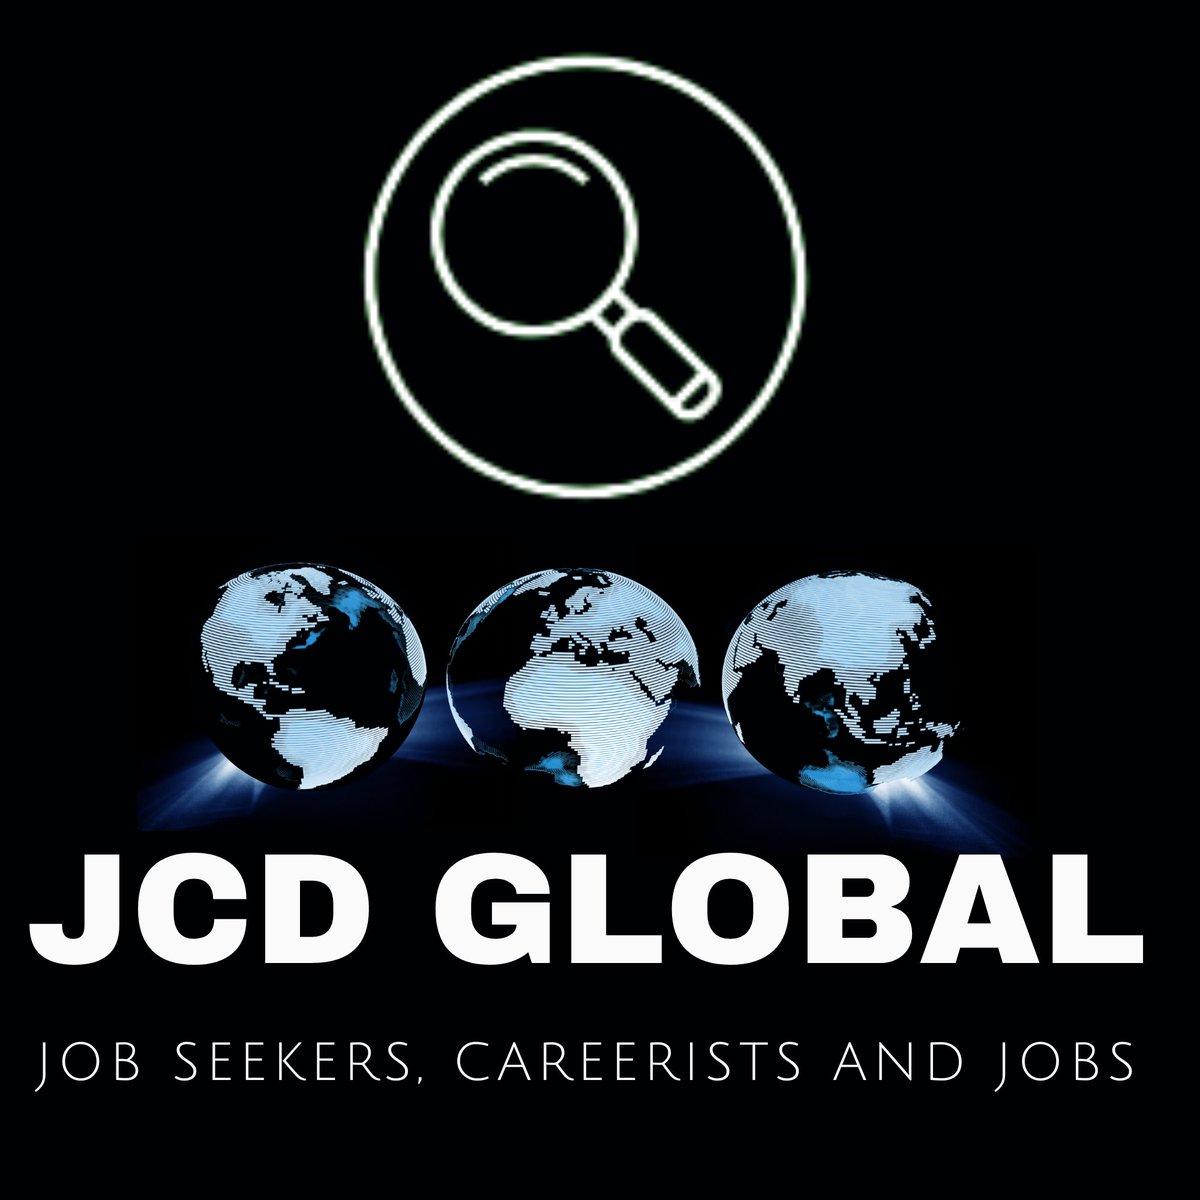 Employers, Job Seekers, Careerists! Hire and Get Hired Worldwide on JCD Global on LinkedIn! Join here buff.ly/43YvkUv

#join #LinkedIn #linkedingroups #global #globaljobs #globalcareers #globalhiring #globalhr #internationaljobs #internationalcareer #worldwide #findjobs